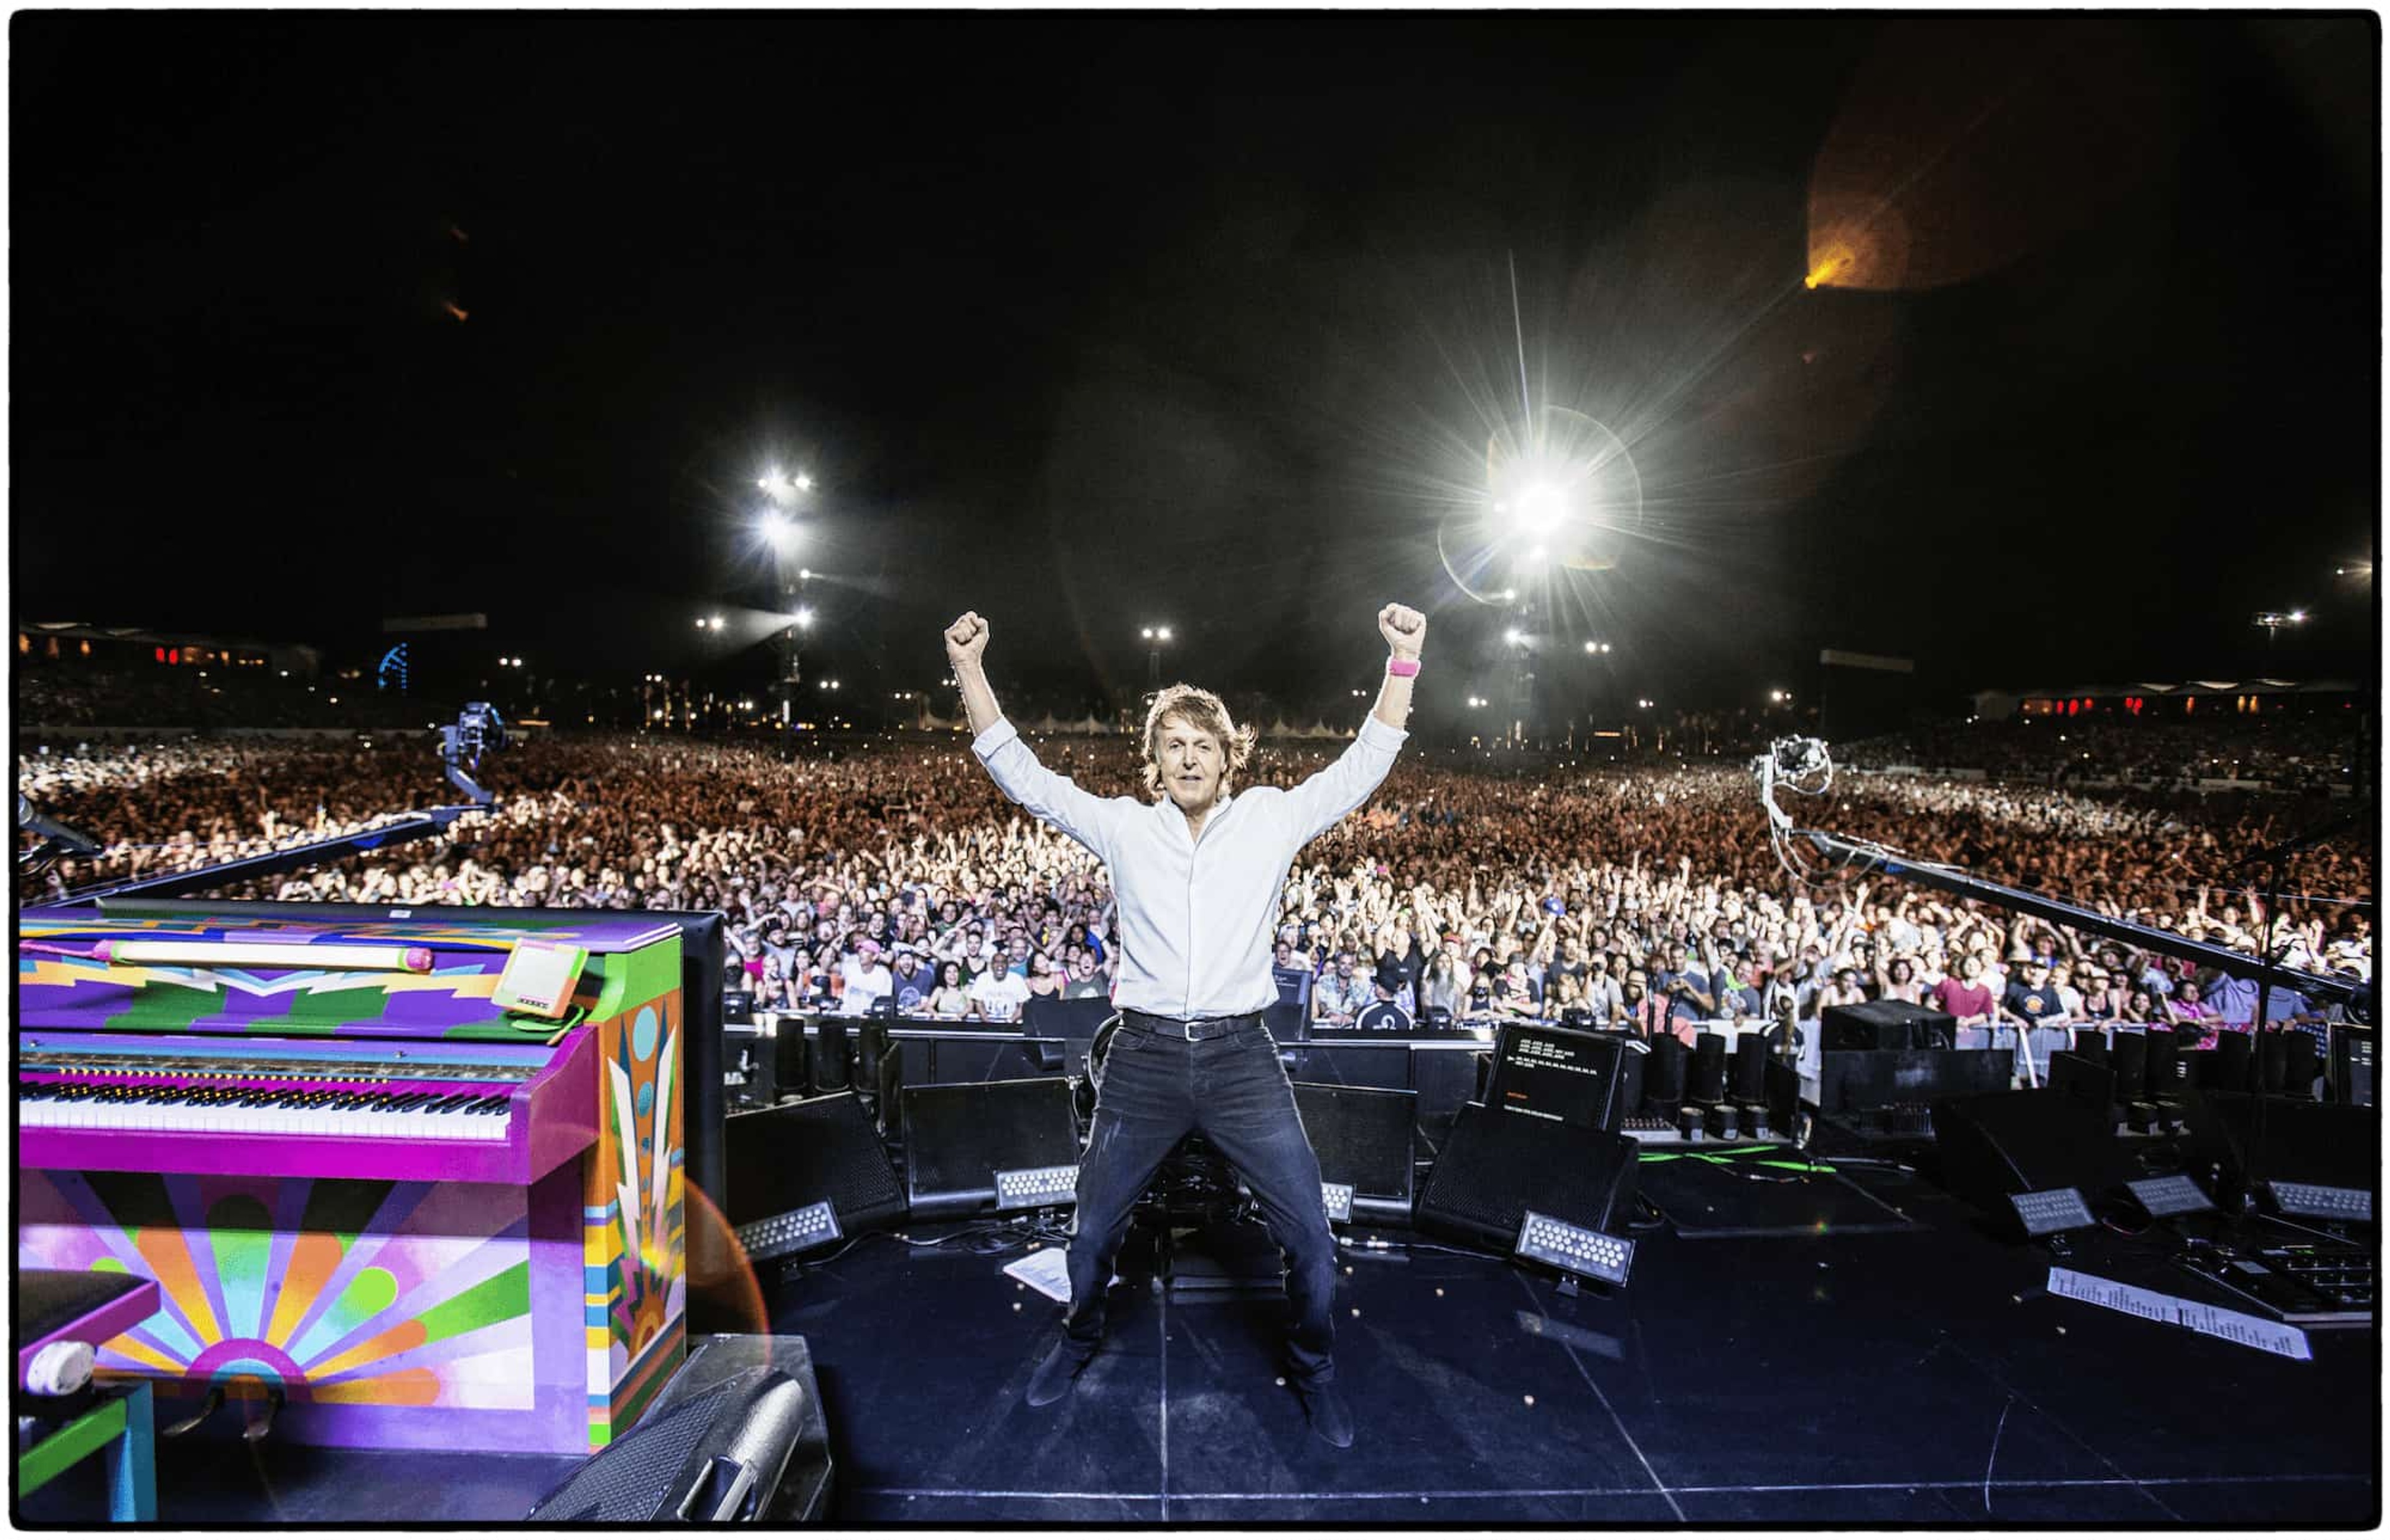 Paul on stage at Desert Trip festival in 2016